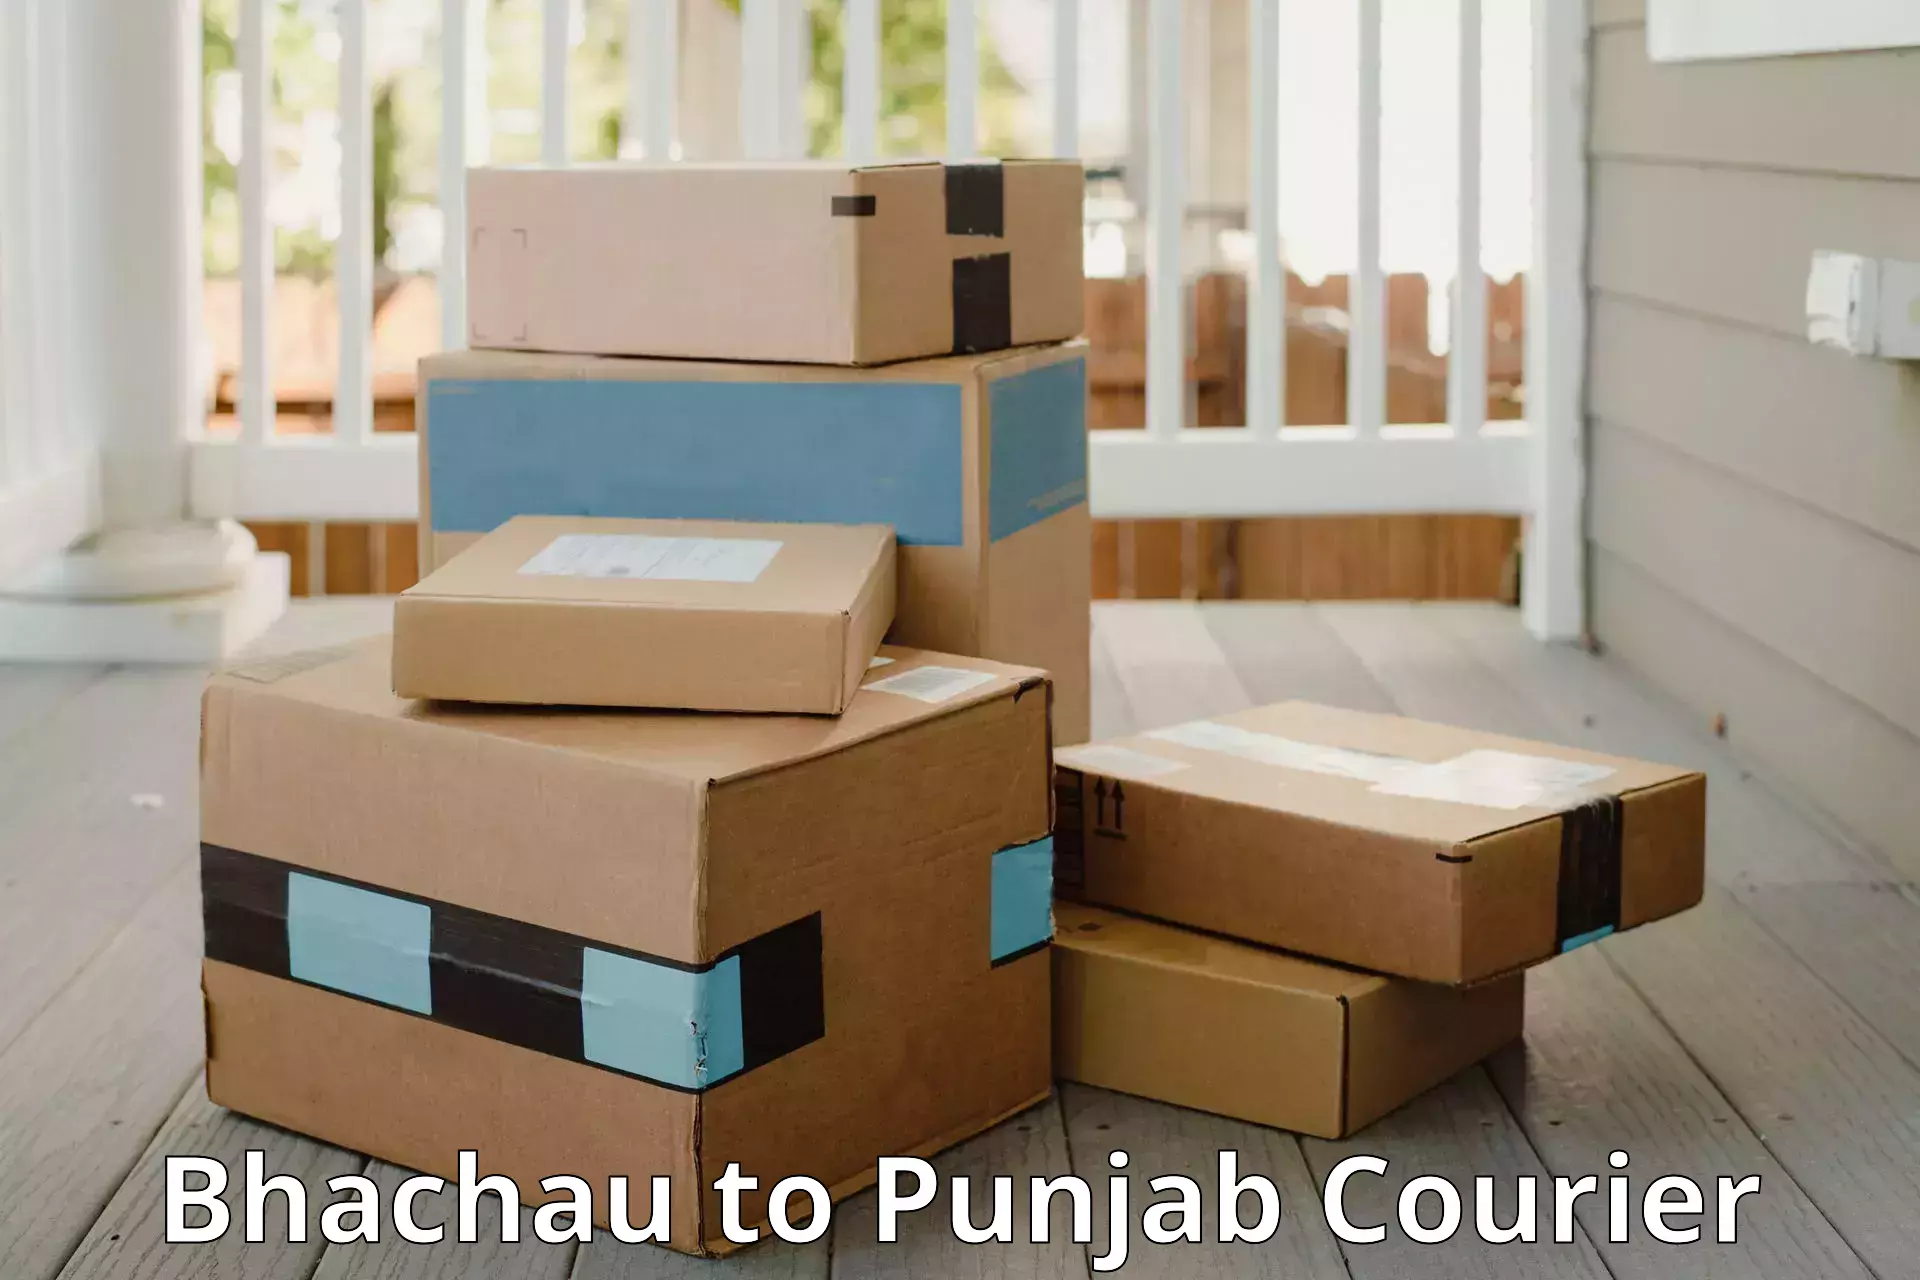 Luggage transport consulting in Bhachau to Punjab